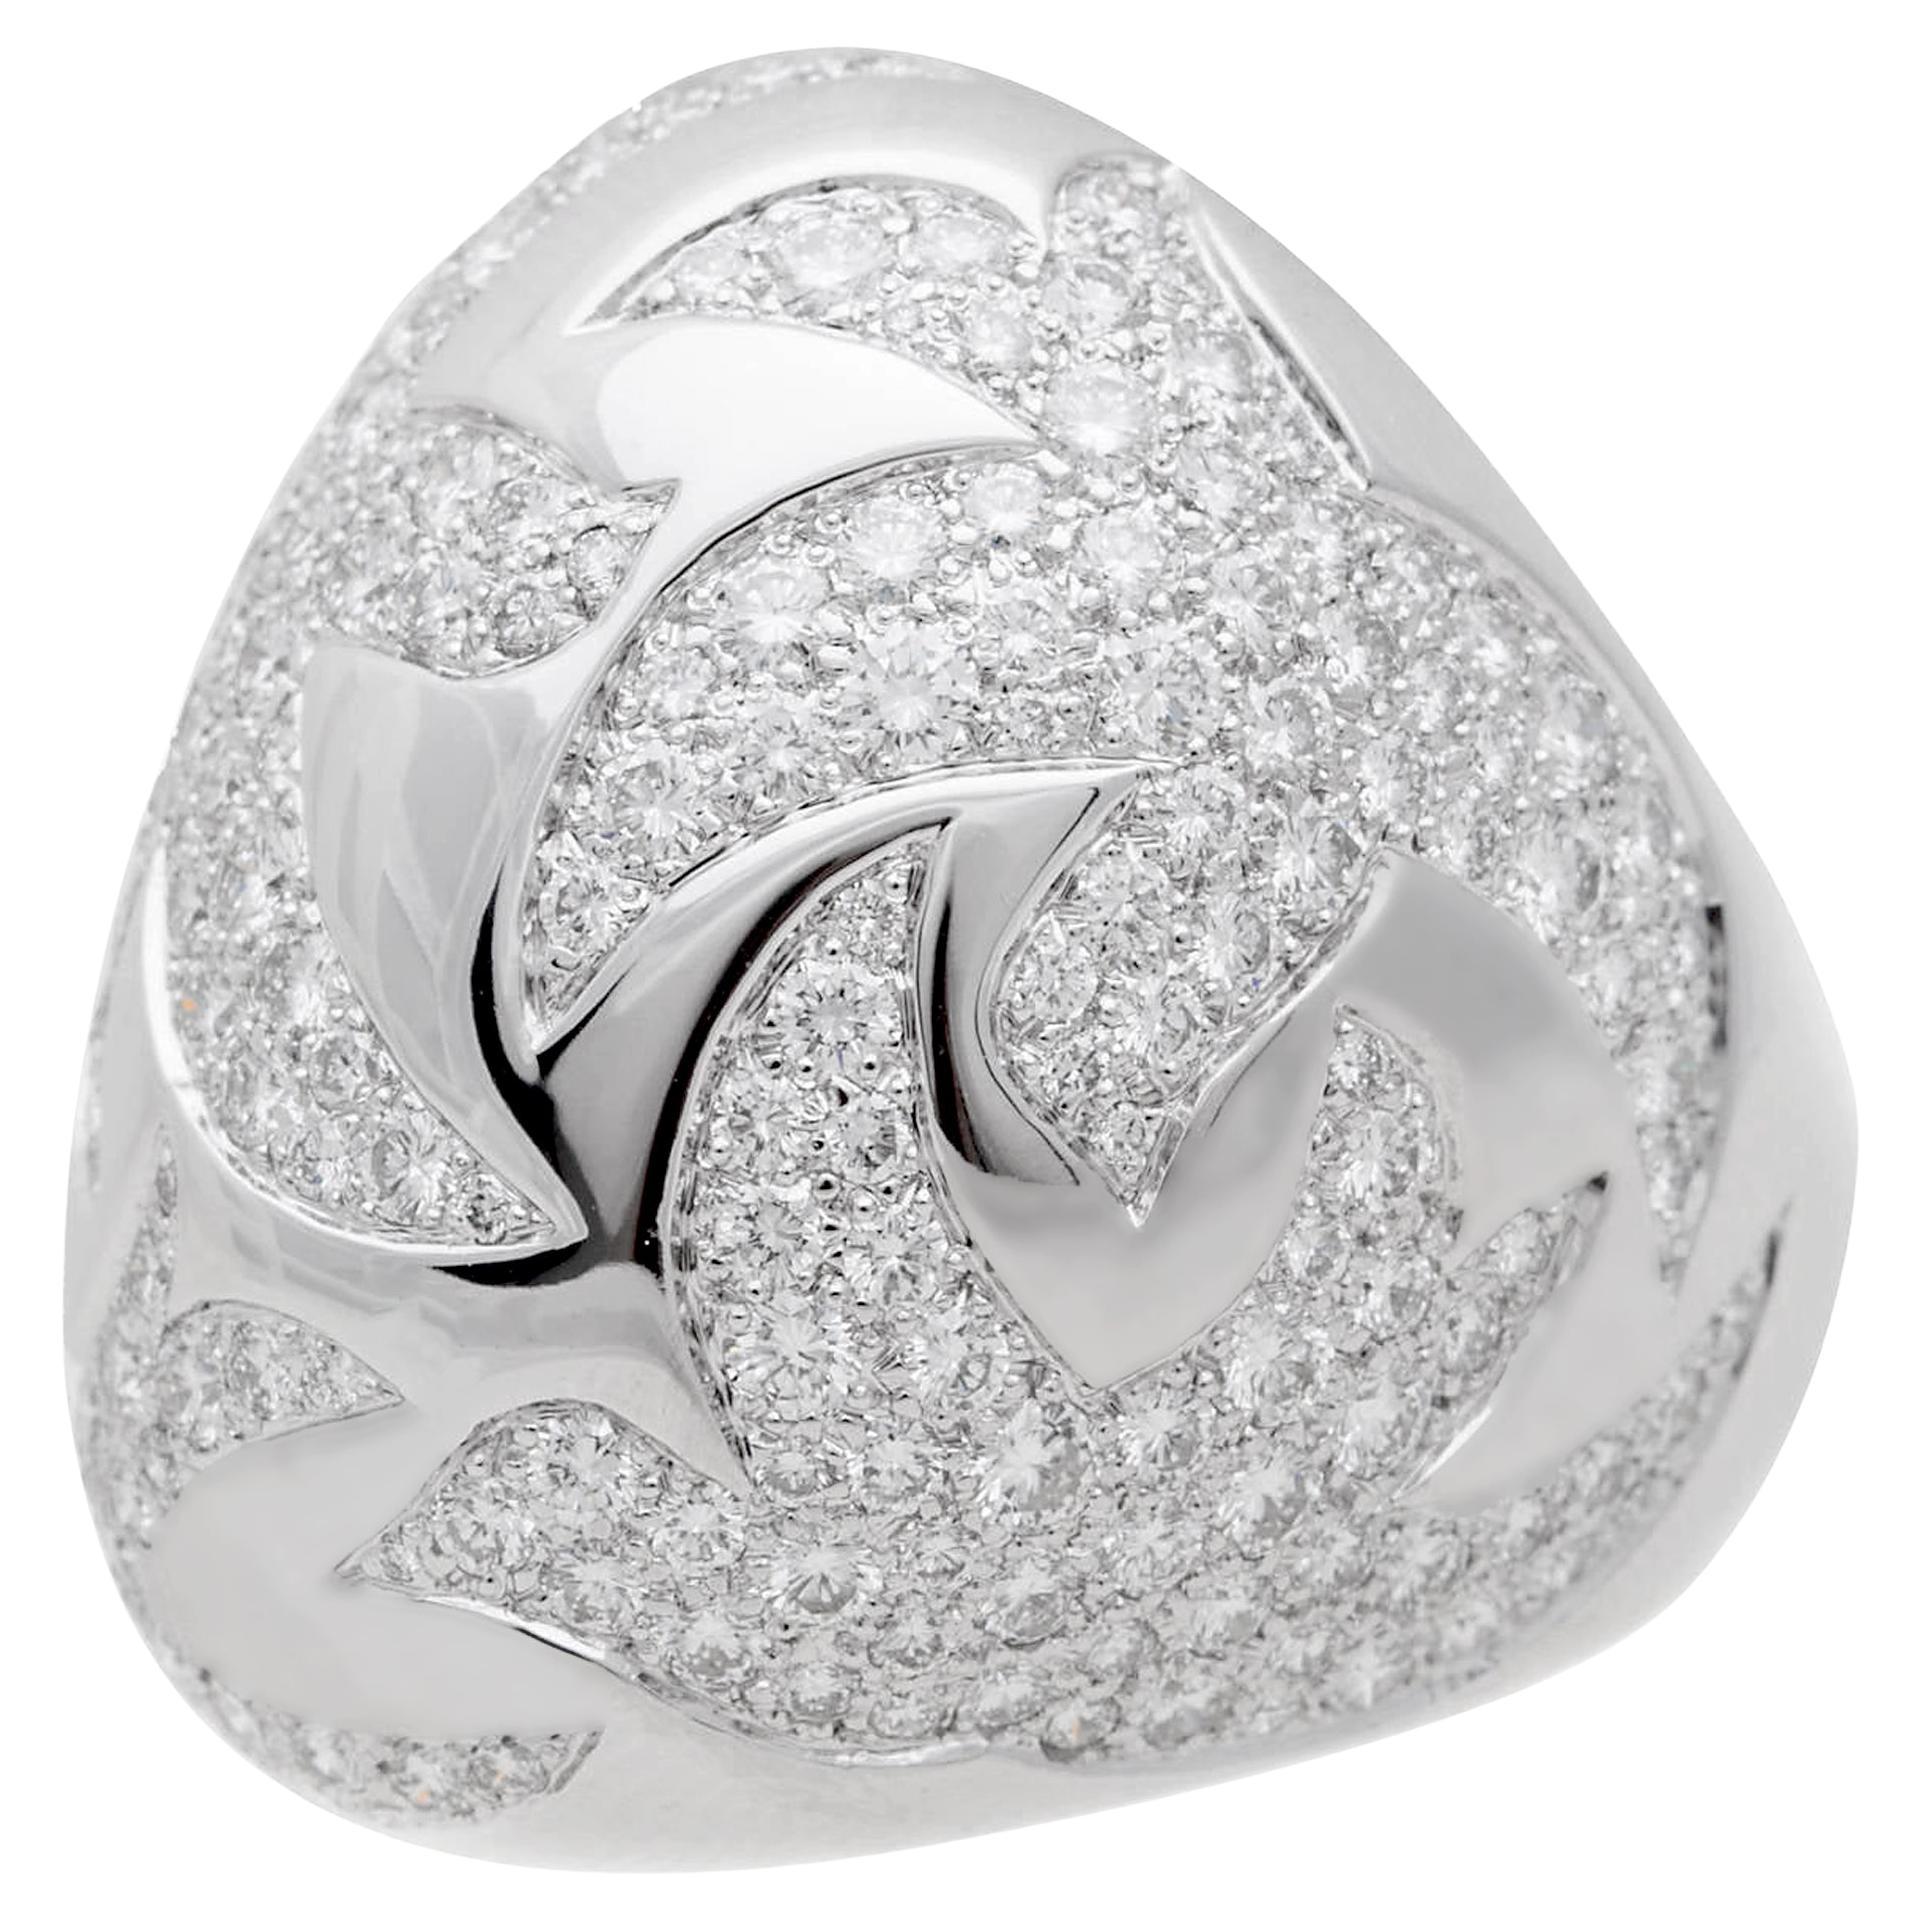 Cartier Dove of Peace Diamond White Gold Bombe Cocktail Ring